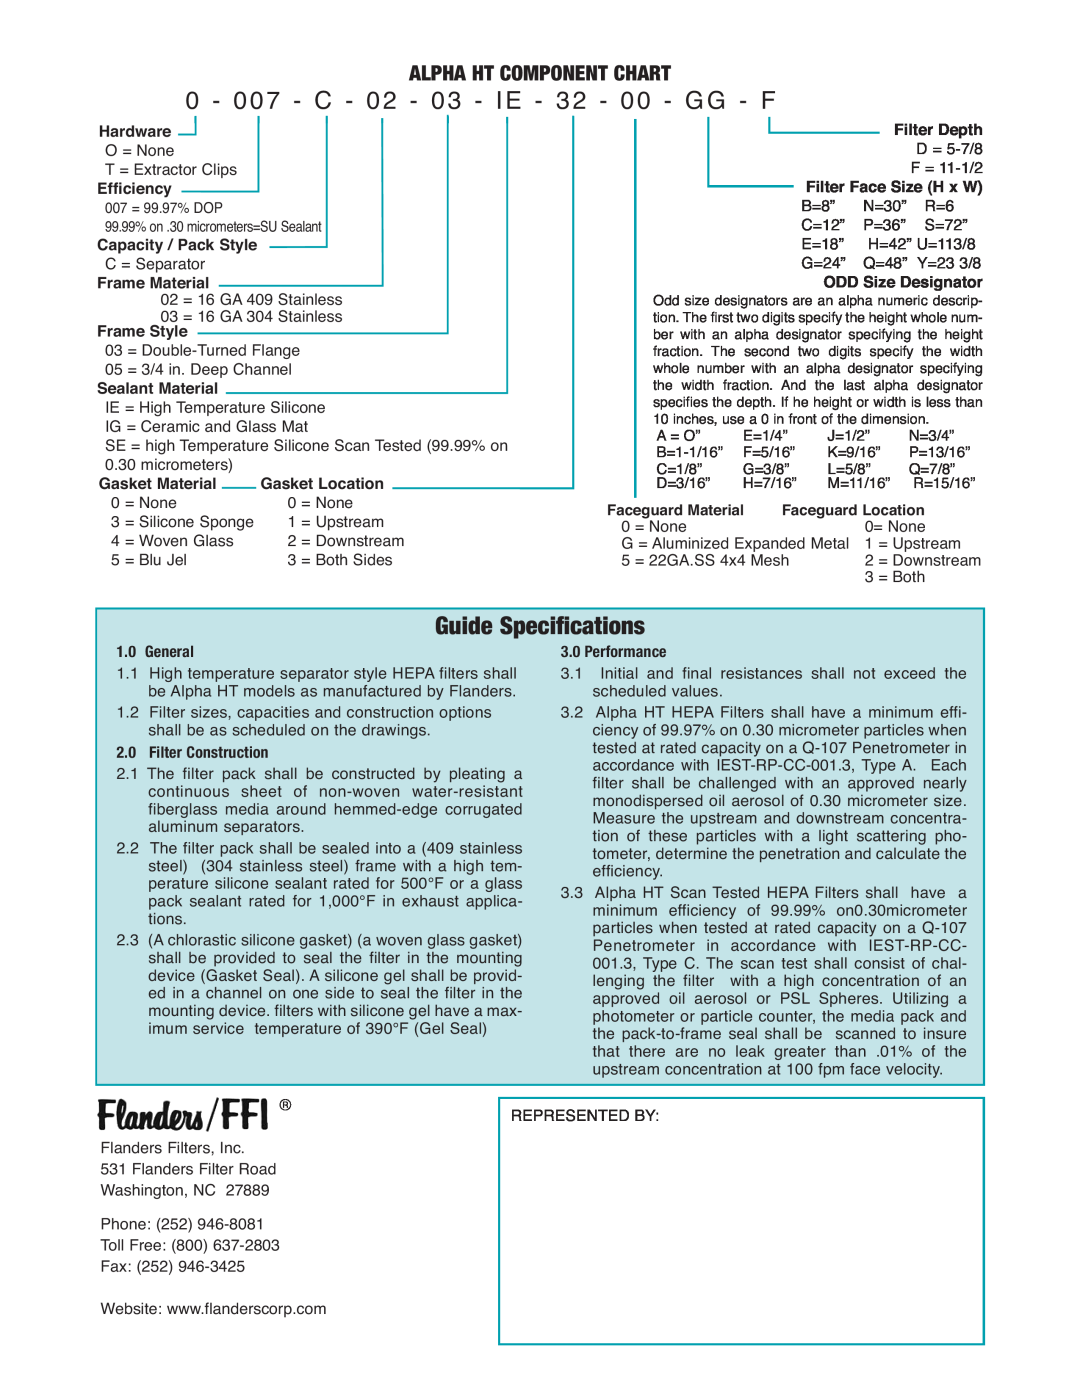 Precisionaire PB1403 dimensions Guide Specifications, Alpha Ht Component Chart 